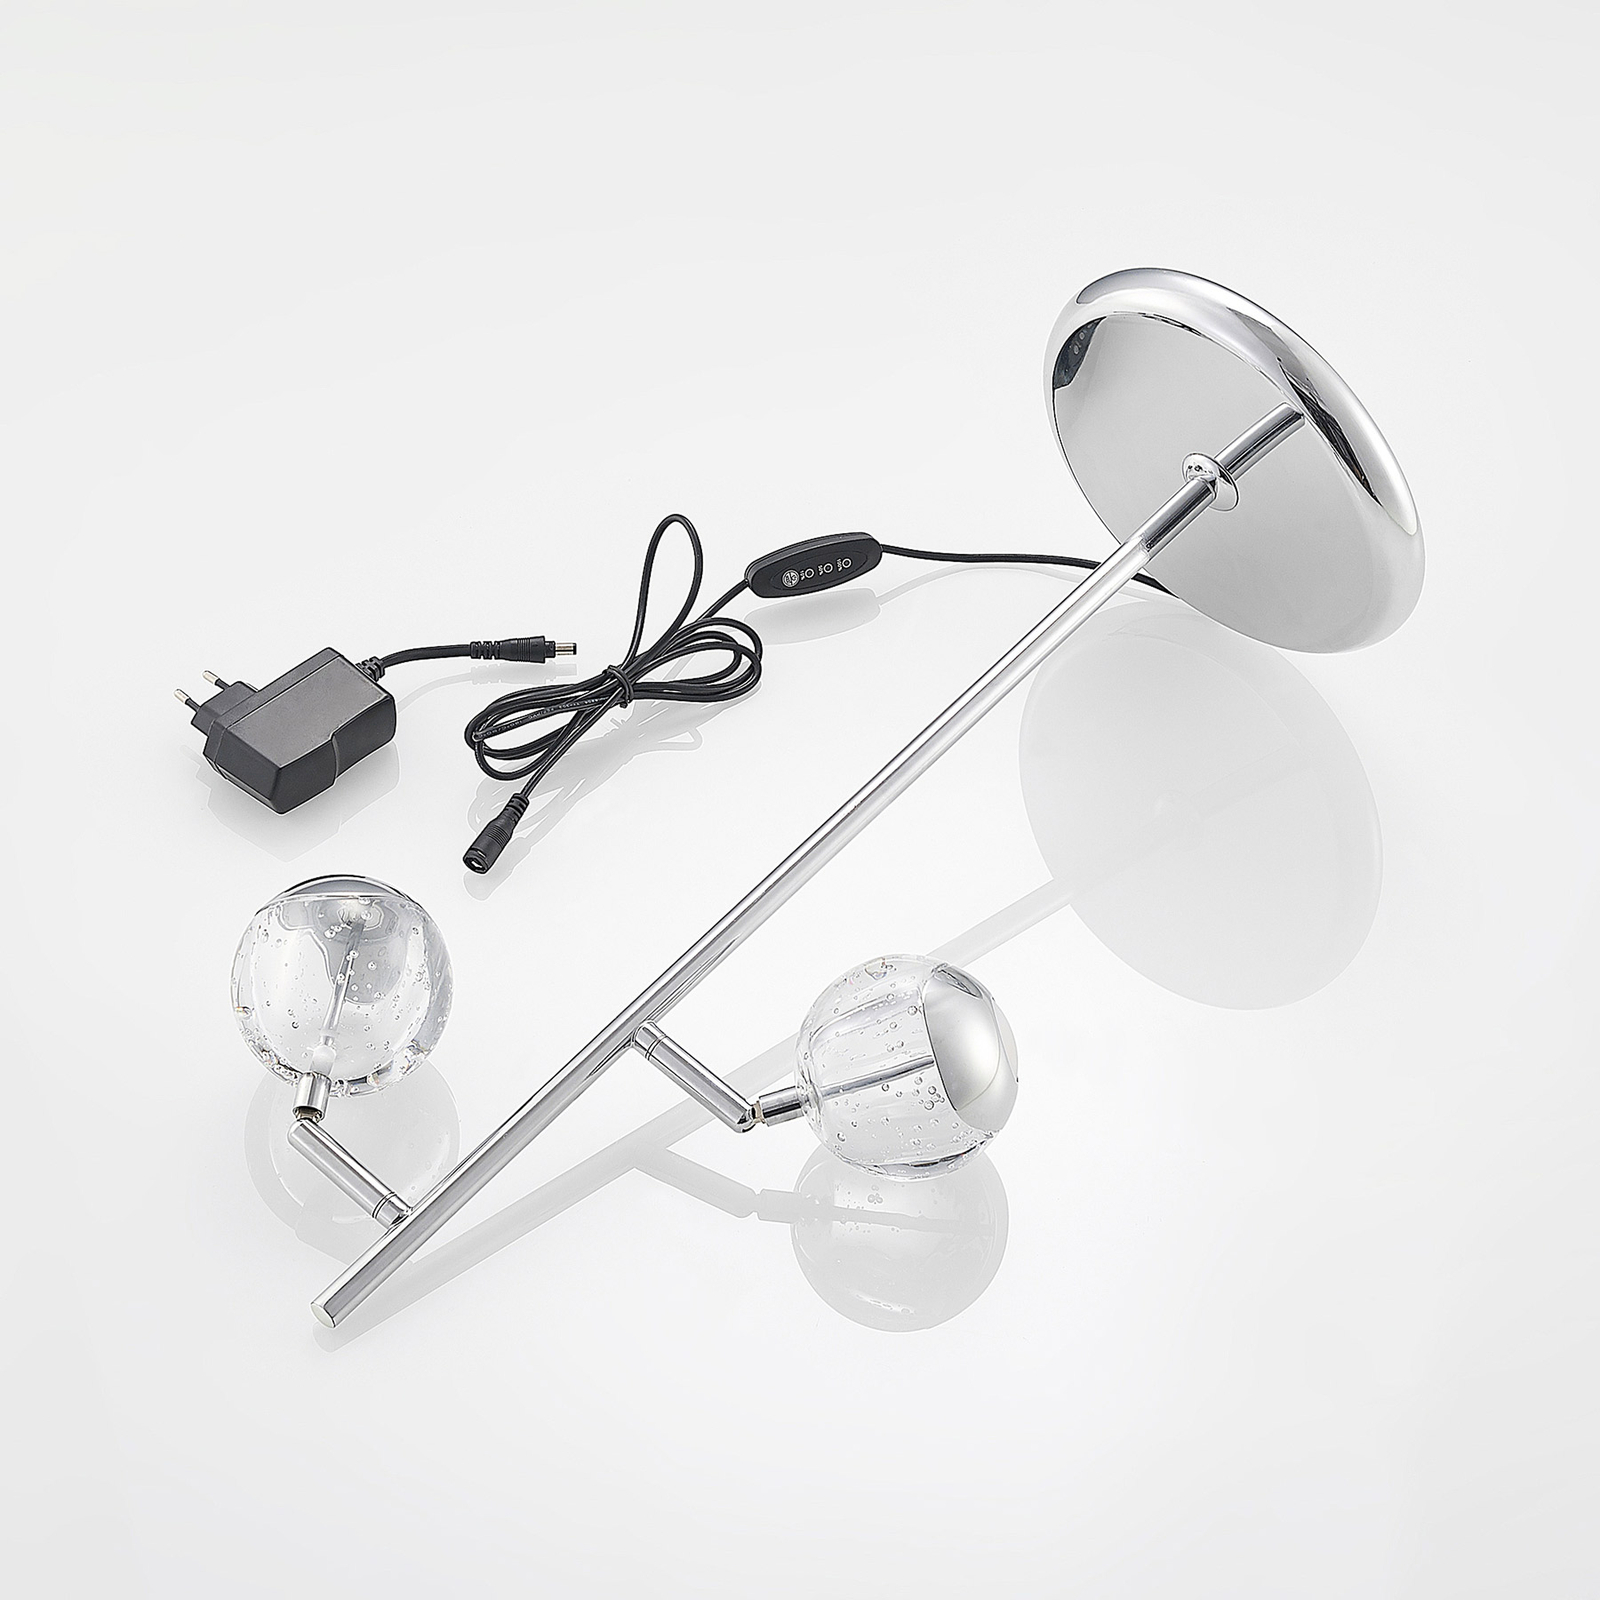 Lucande Kilio LED table lamp, dimmable, in chrome